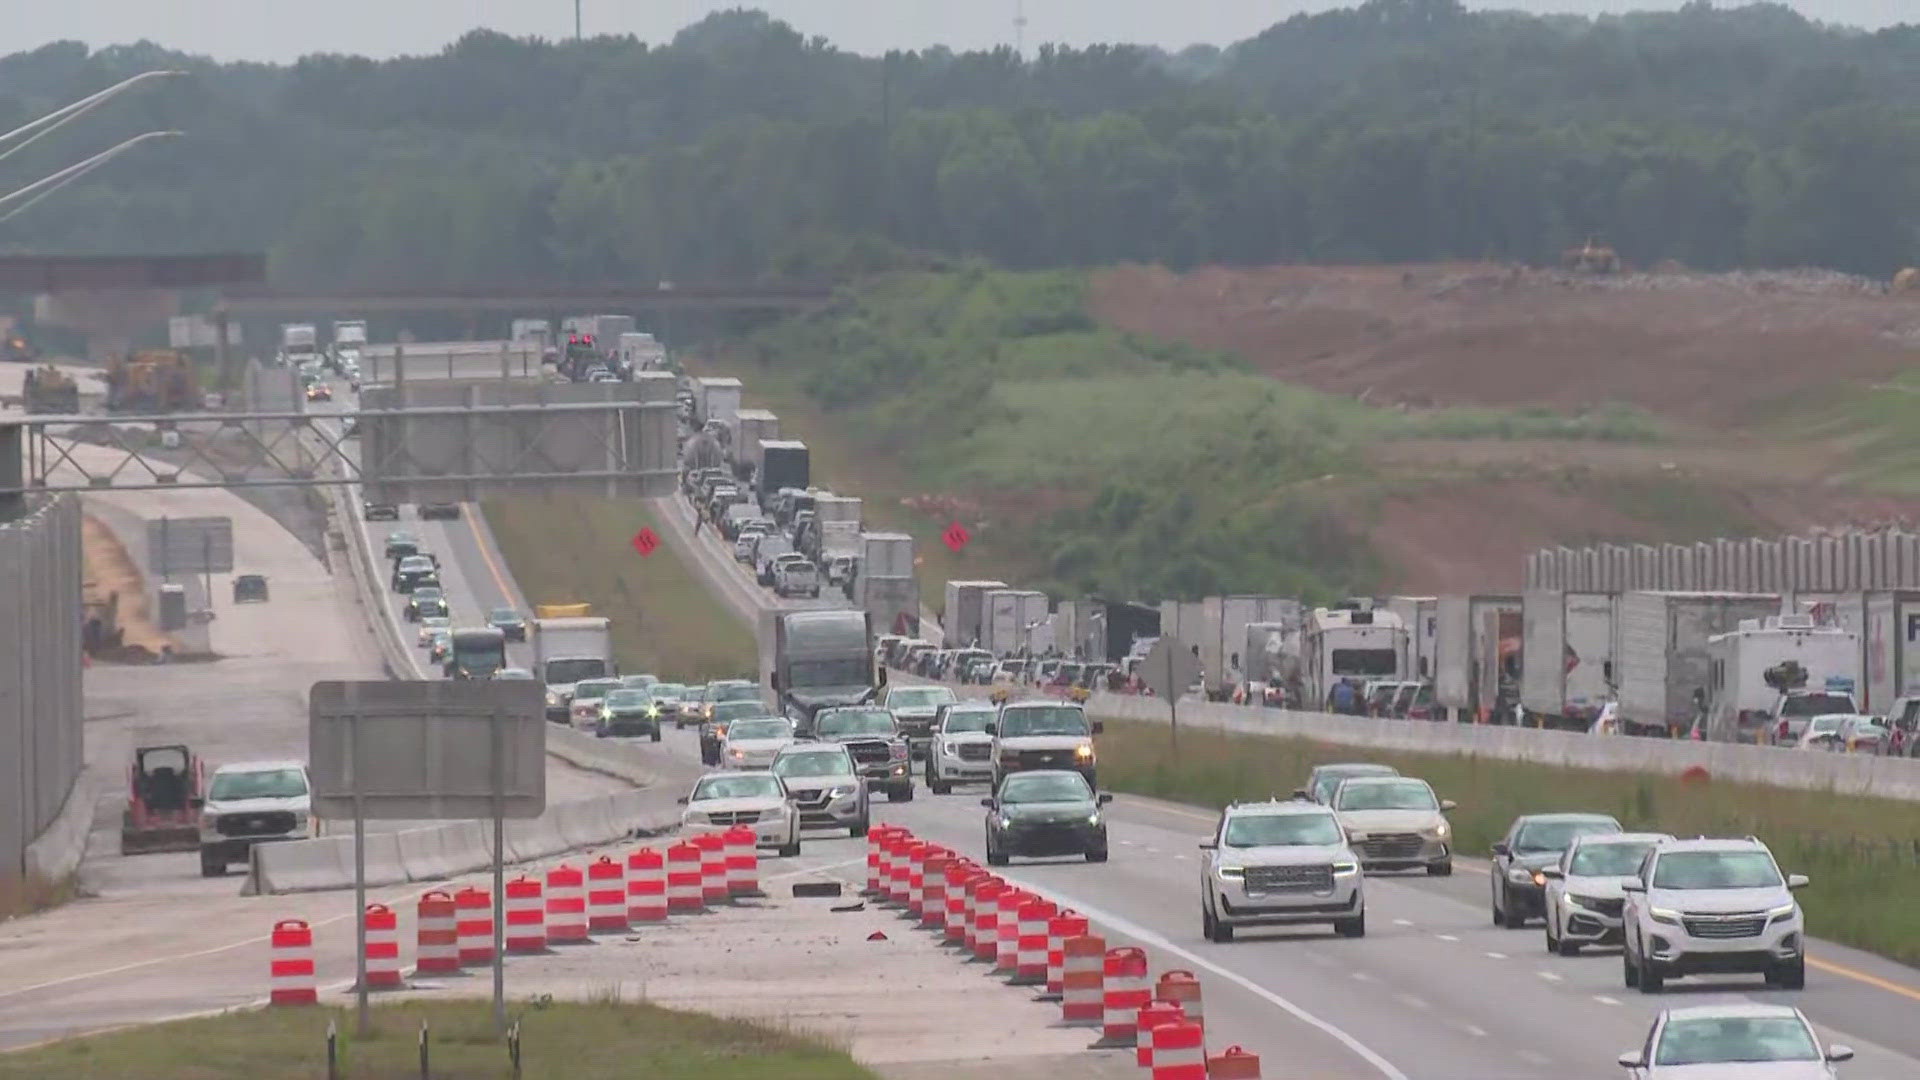 An overturned RV caused heavy traffic on I-40 near Union Cross Road.